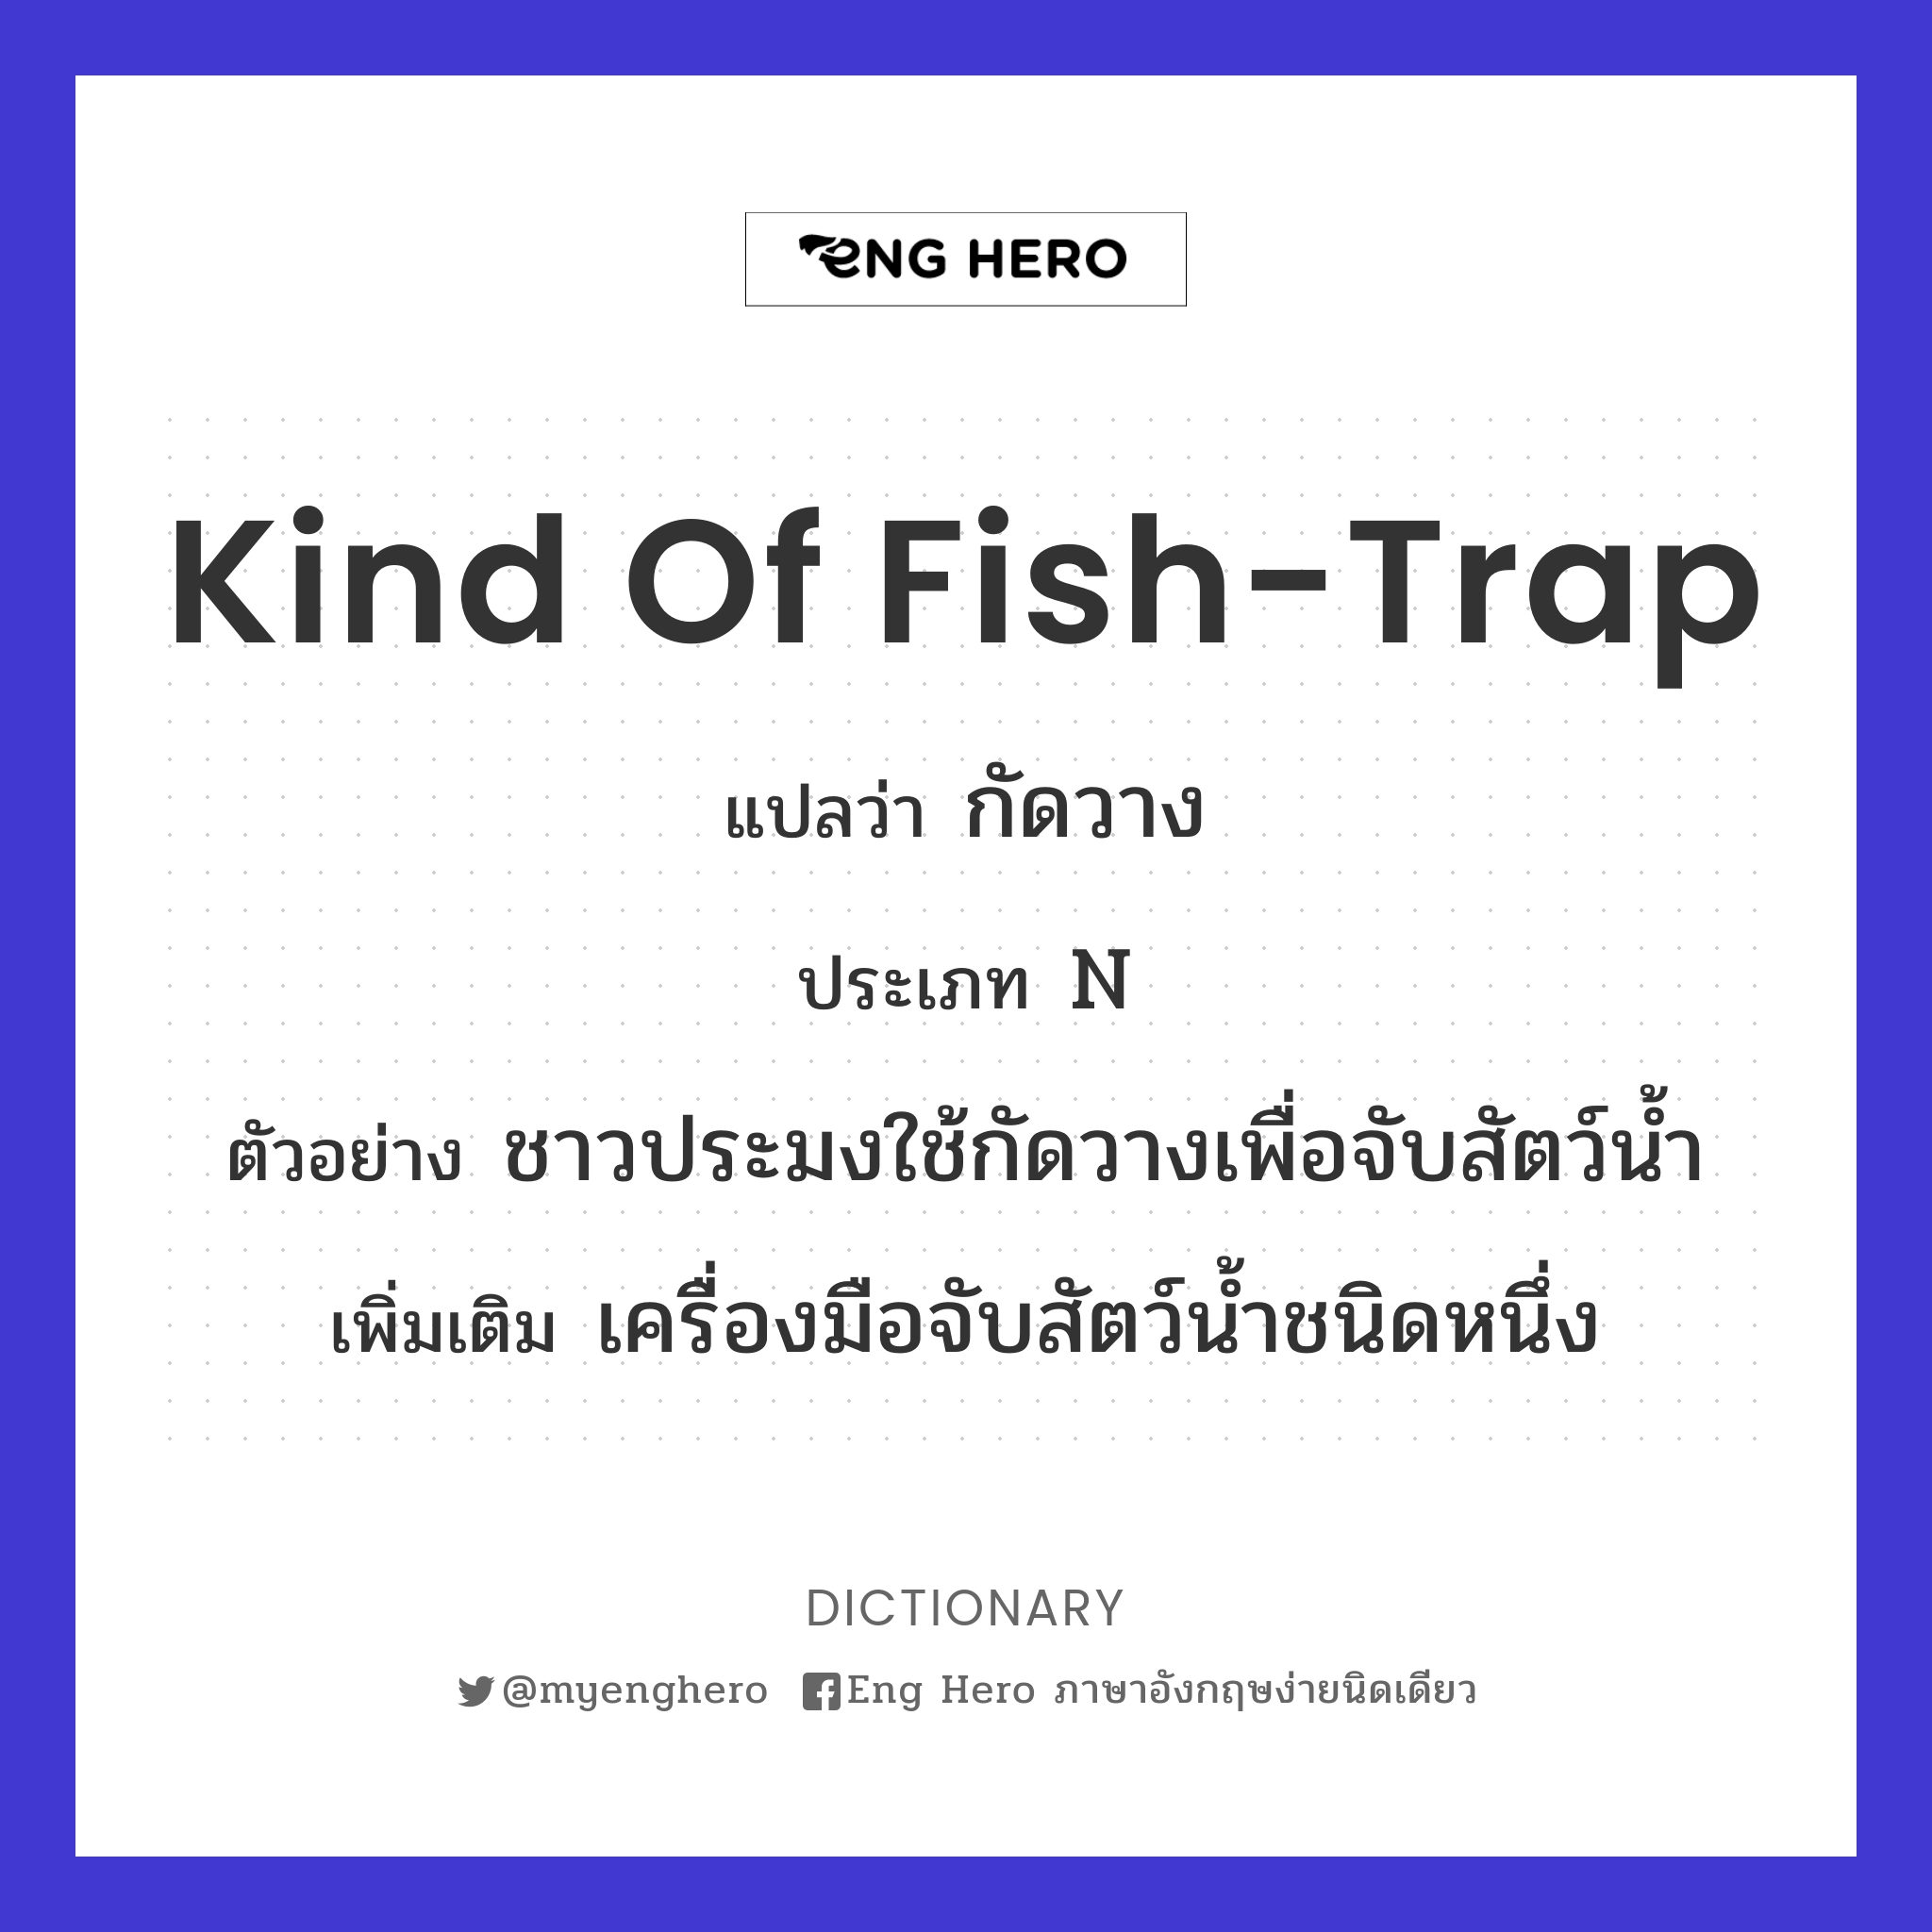 kind of fish-trap